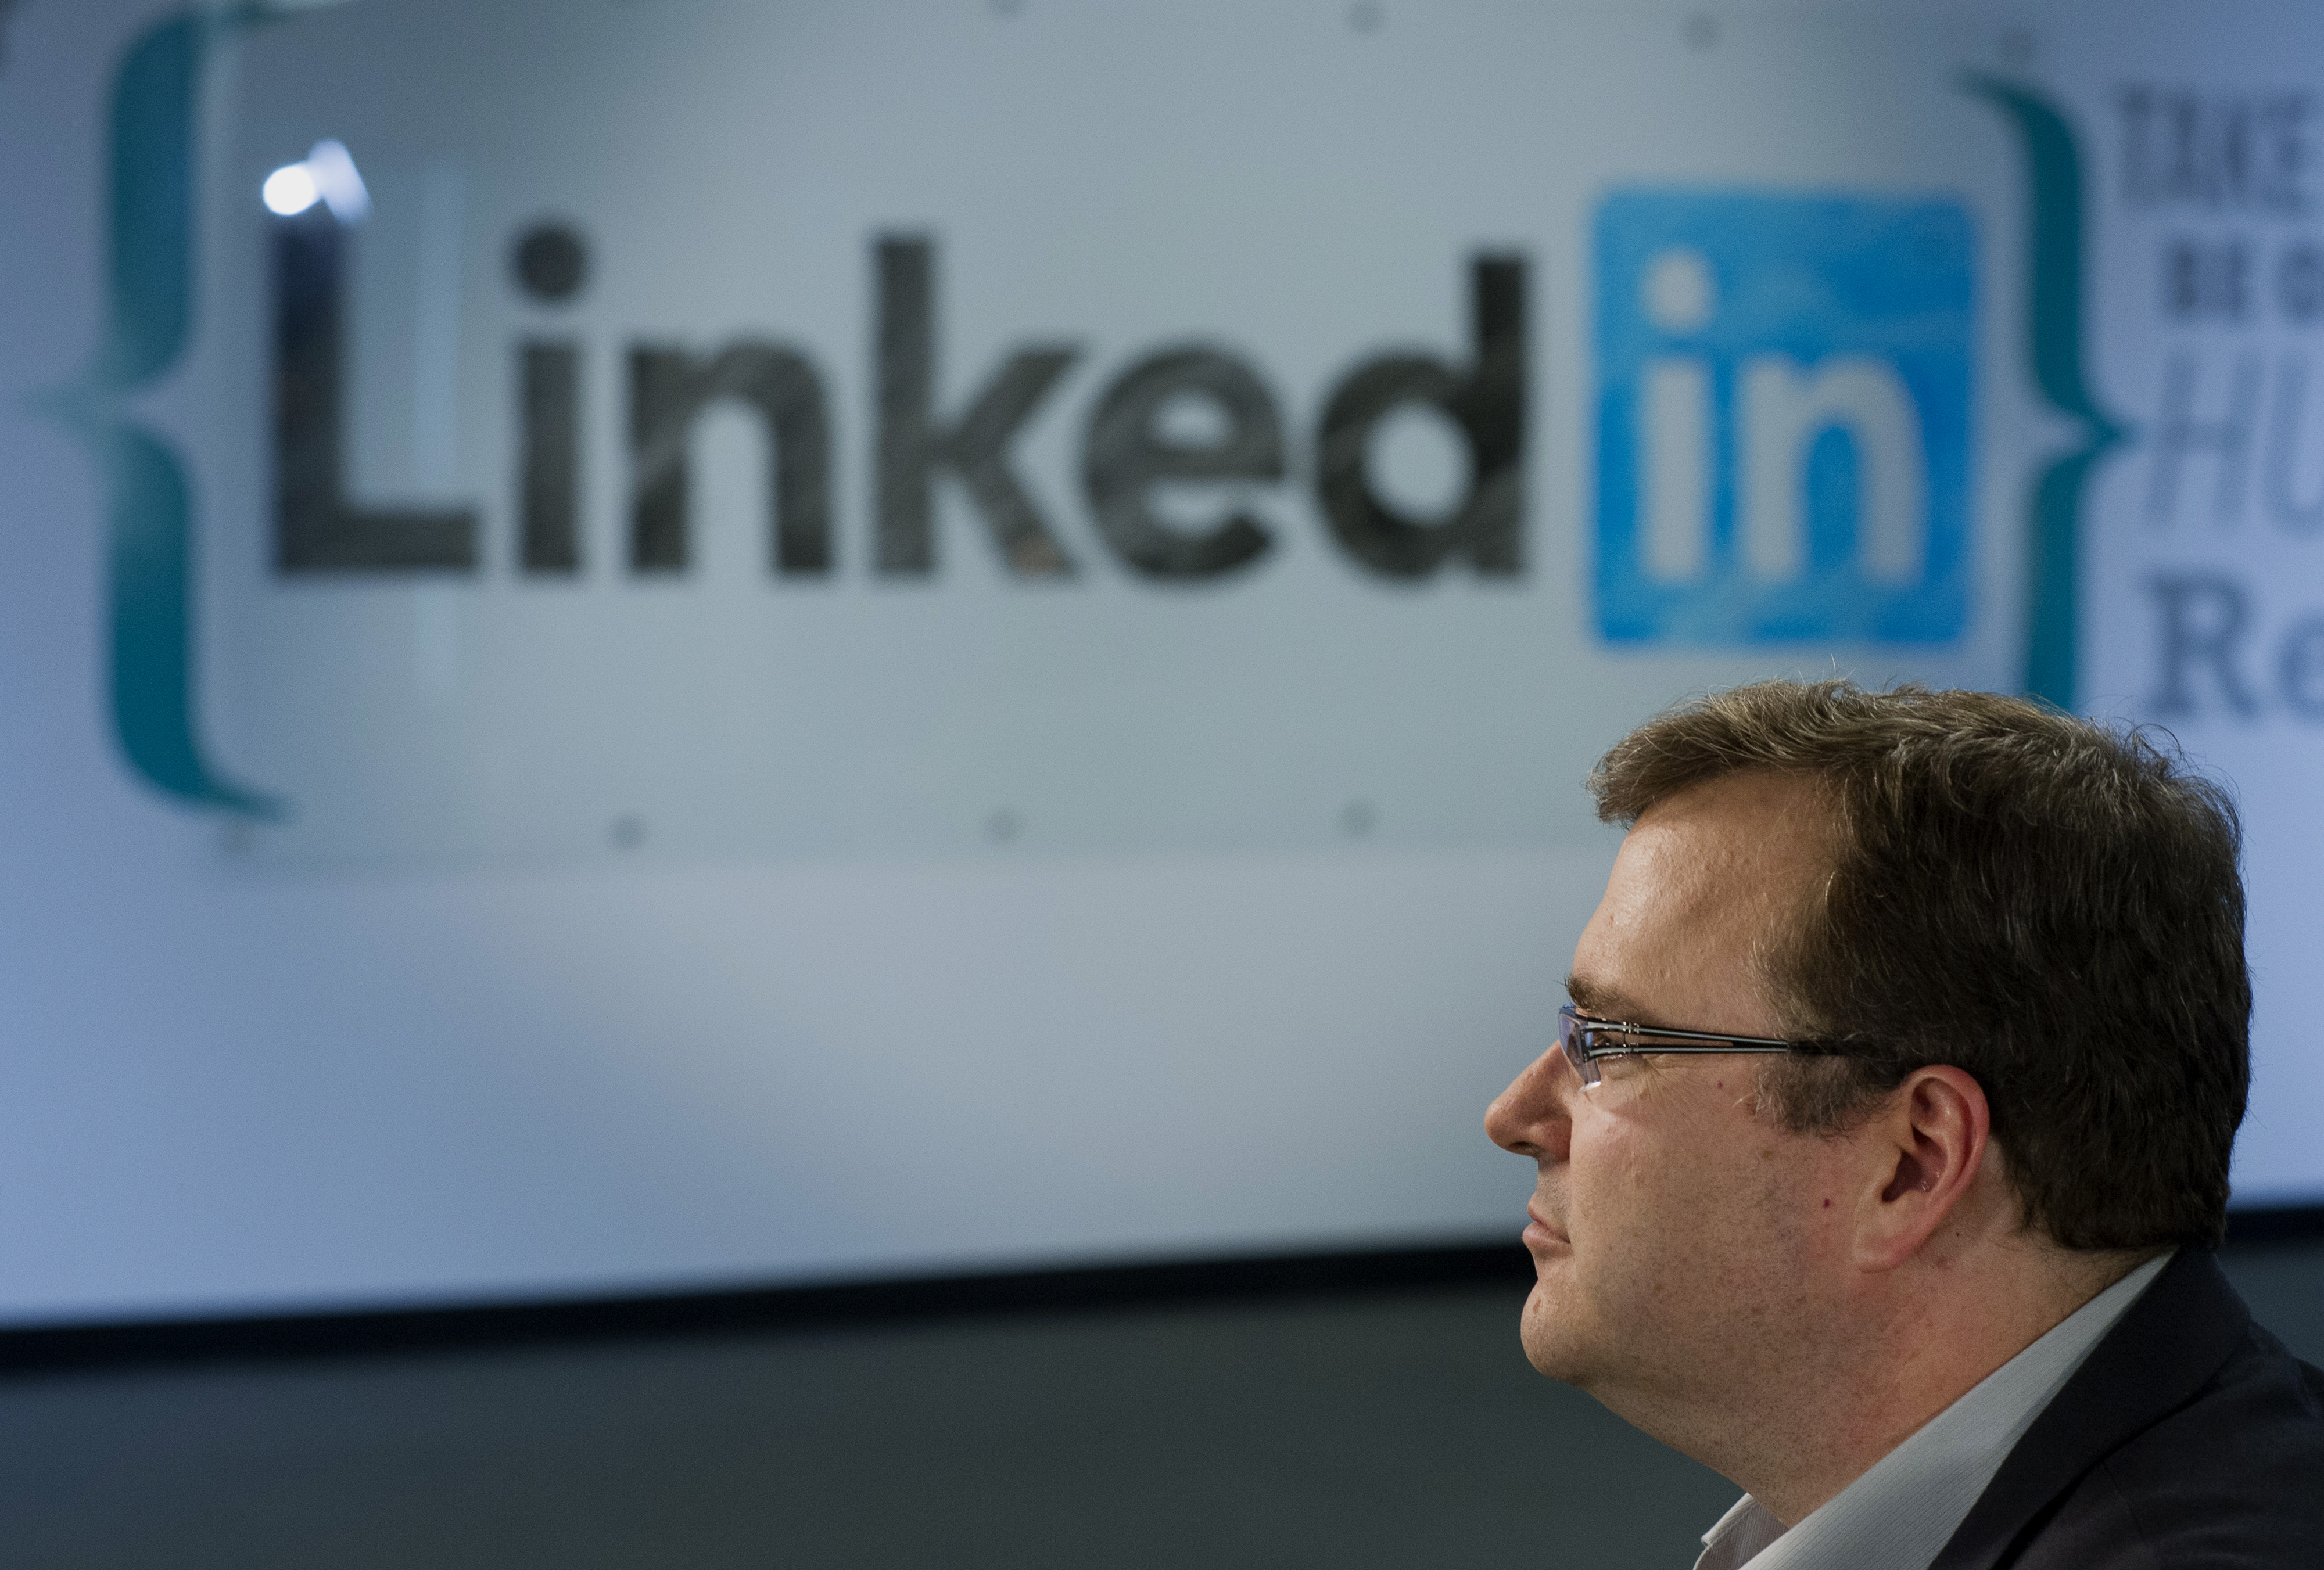 Reid Hoffman, chairman and co-founder of LinkedIn Corp., pauses during a Bloomberg Television interview in Sunnyvale, California, U.S., on Thursday, June 12, 2014. LinkedIn announced last week that users will soon have more design license over their profile pages, with the option of adding stock images or a custom backdrop - similar to what's already available on Facebook and Twitter. Photographer: David Paul Morris/Bloomberg via Getty Images (Bloomberg—Bloomberg via Getty Images)